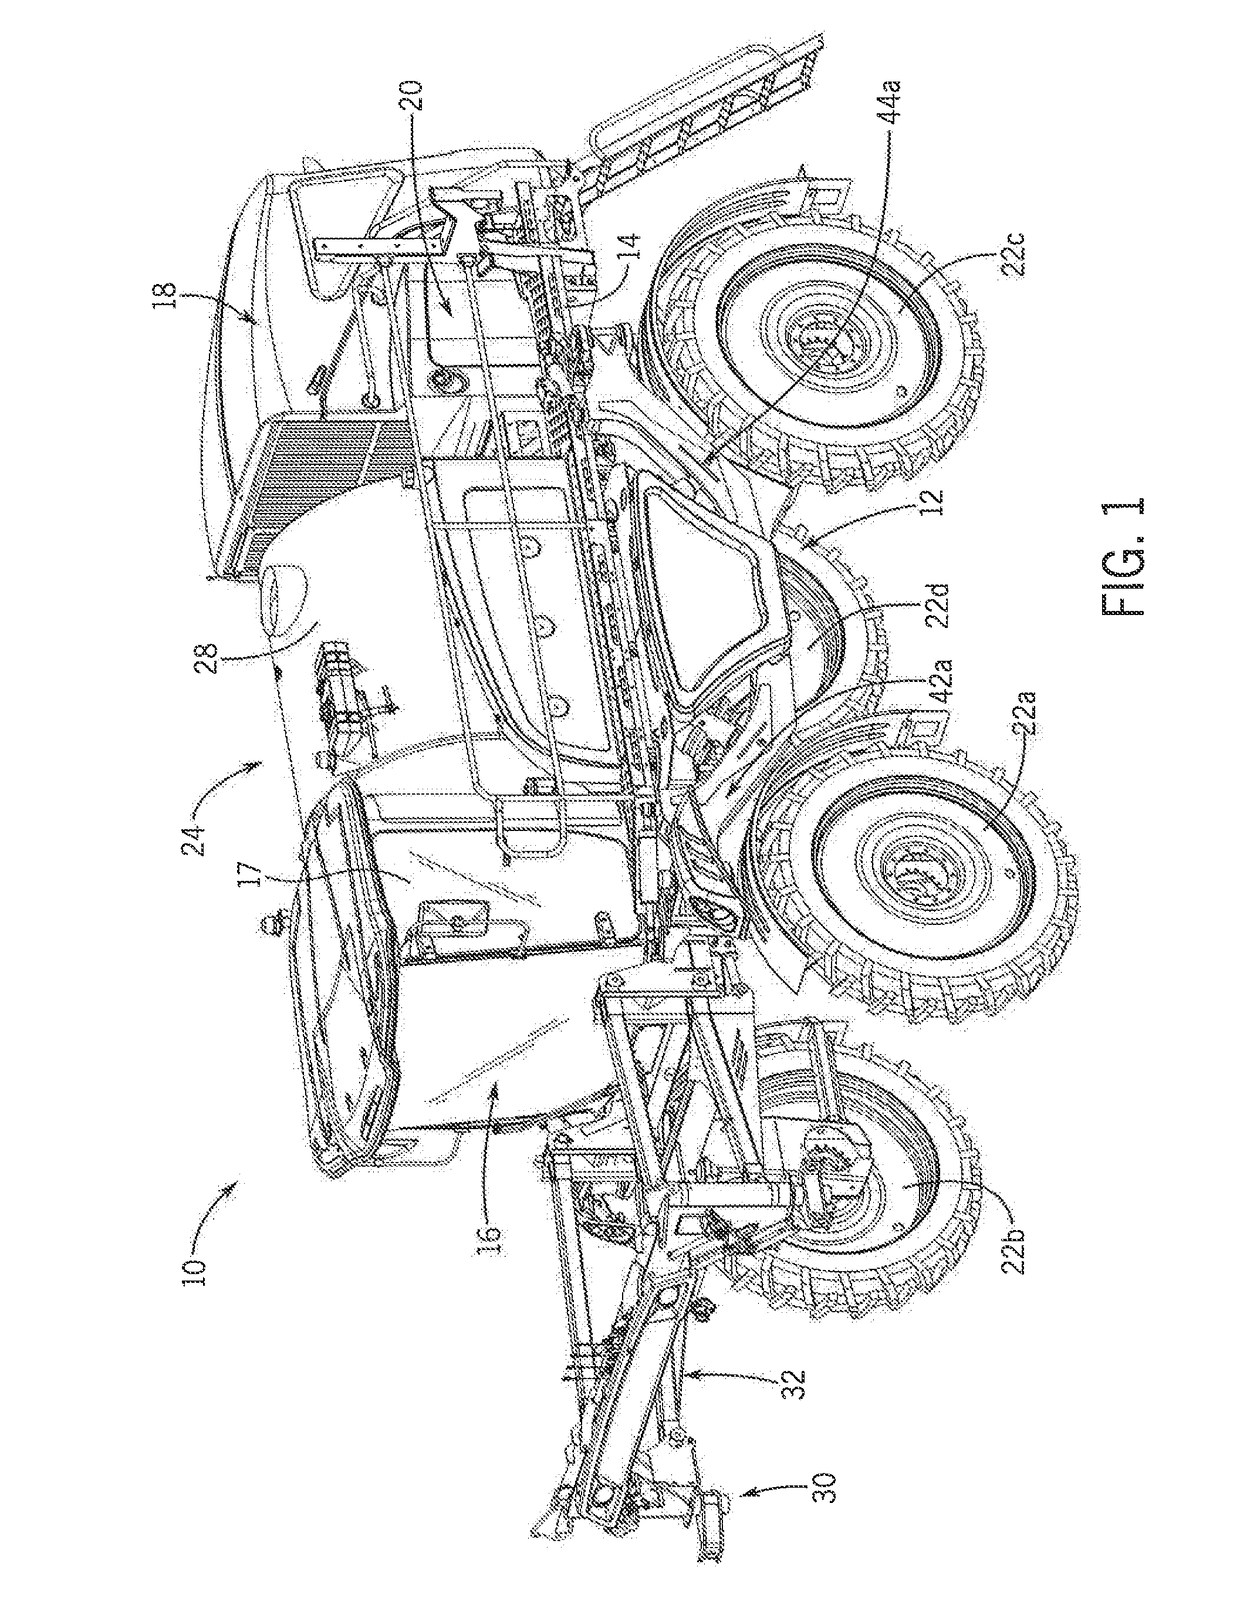 Automatic Steering With Selective Engagement Of Four-Wheel Steering